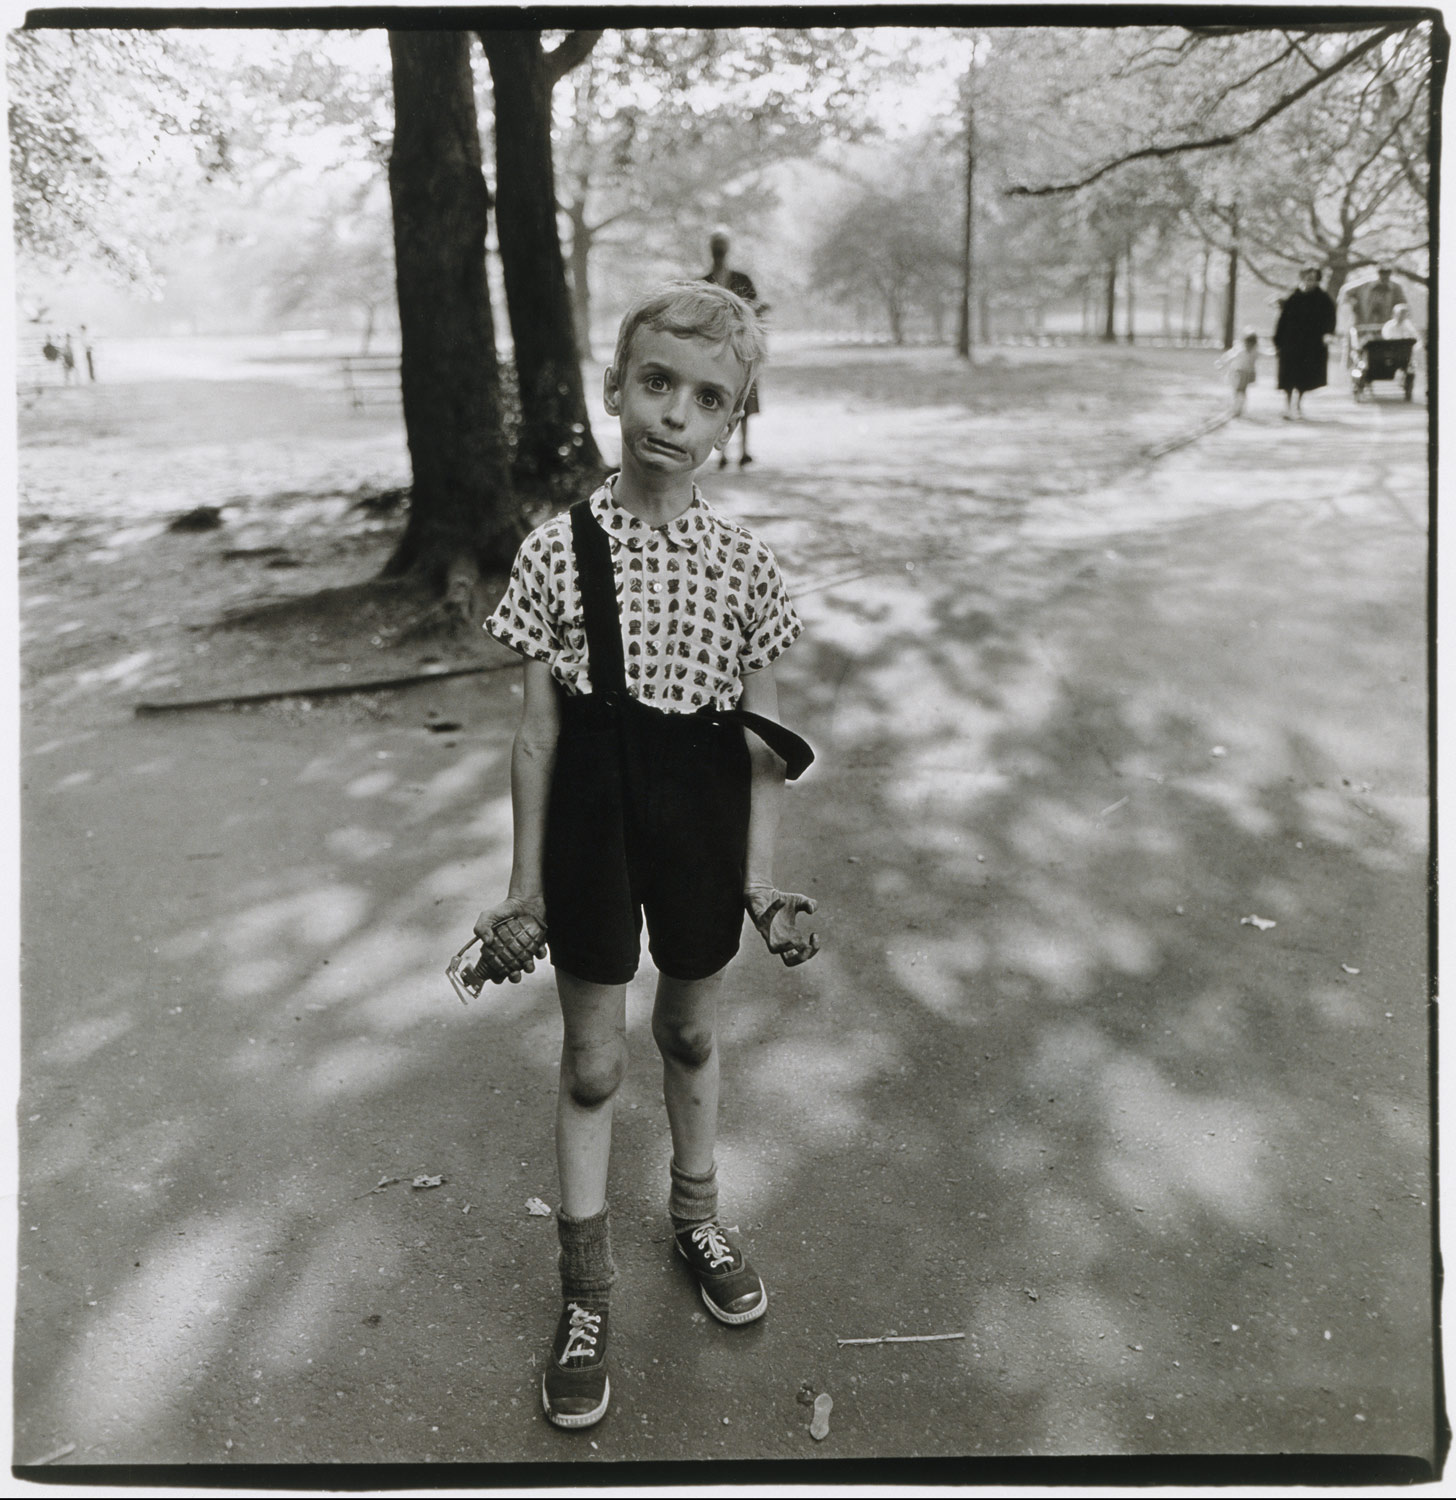 Child with a toy hand grenade in Central Park, N.Y.C.